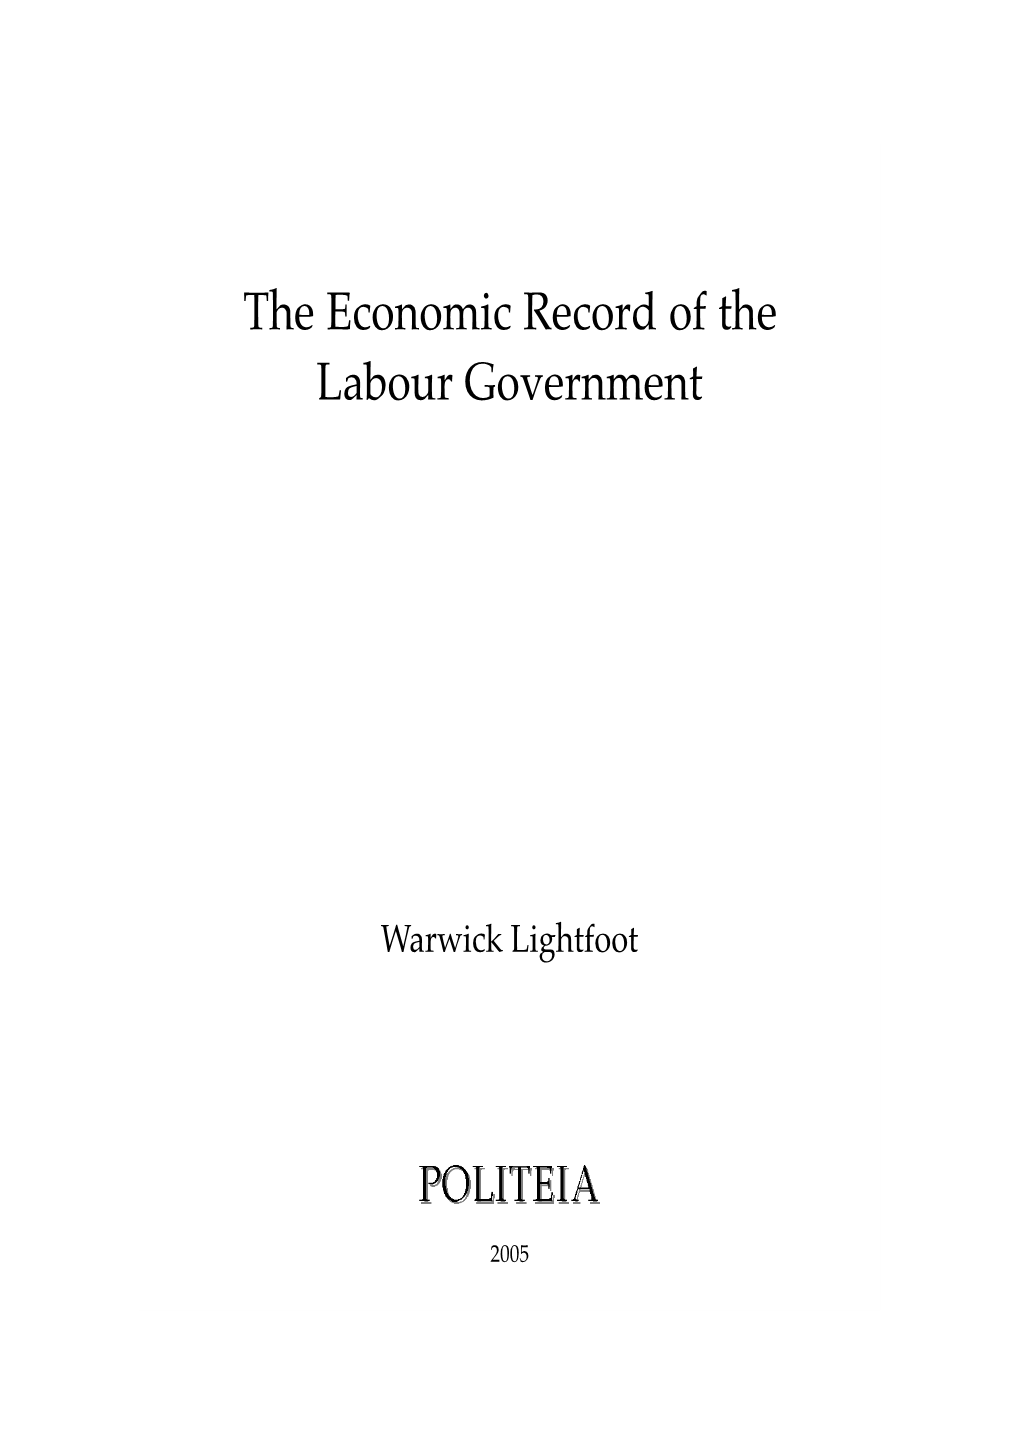 The Economic Record of the Labour Government